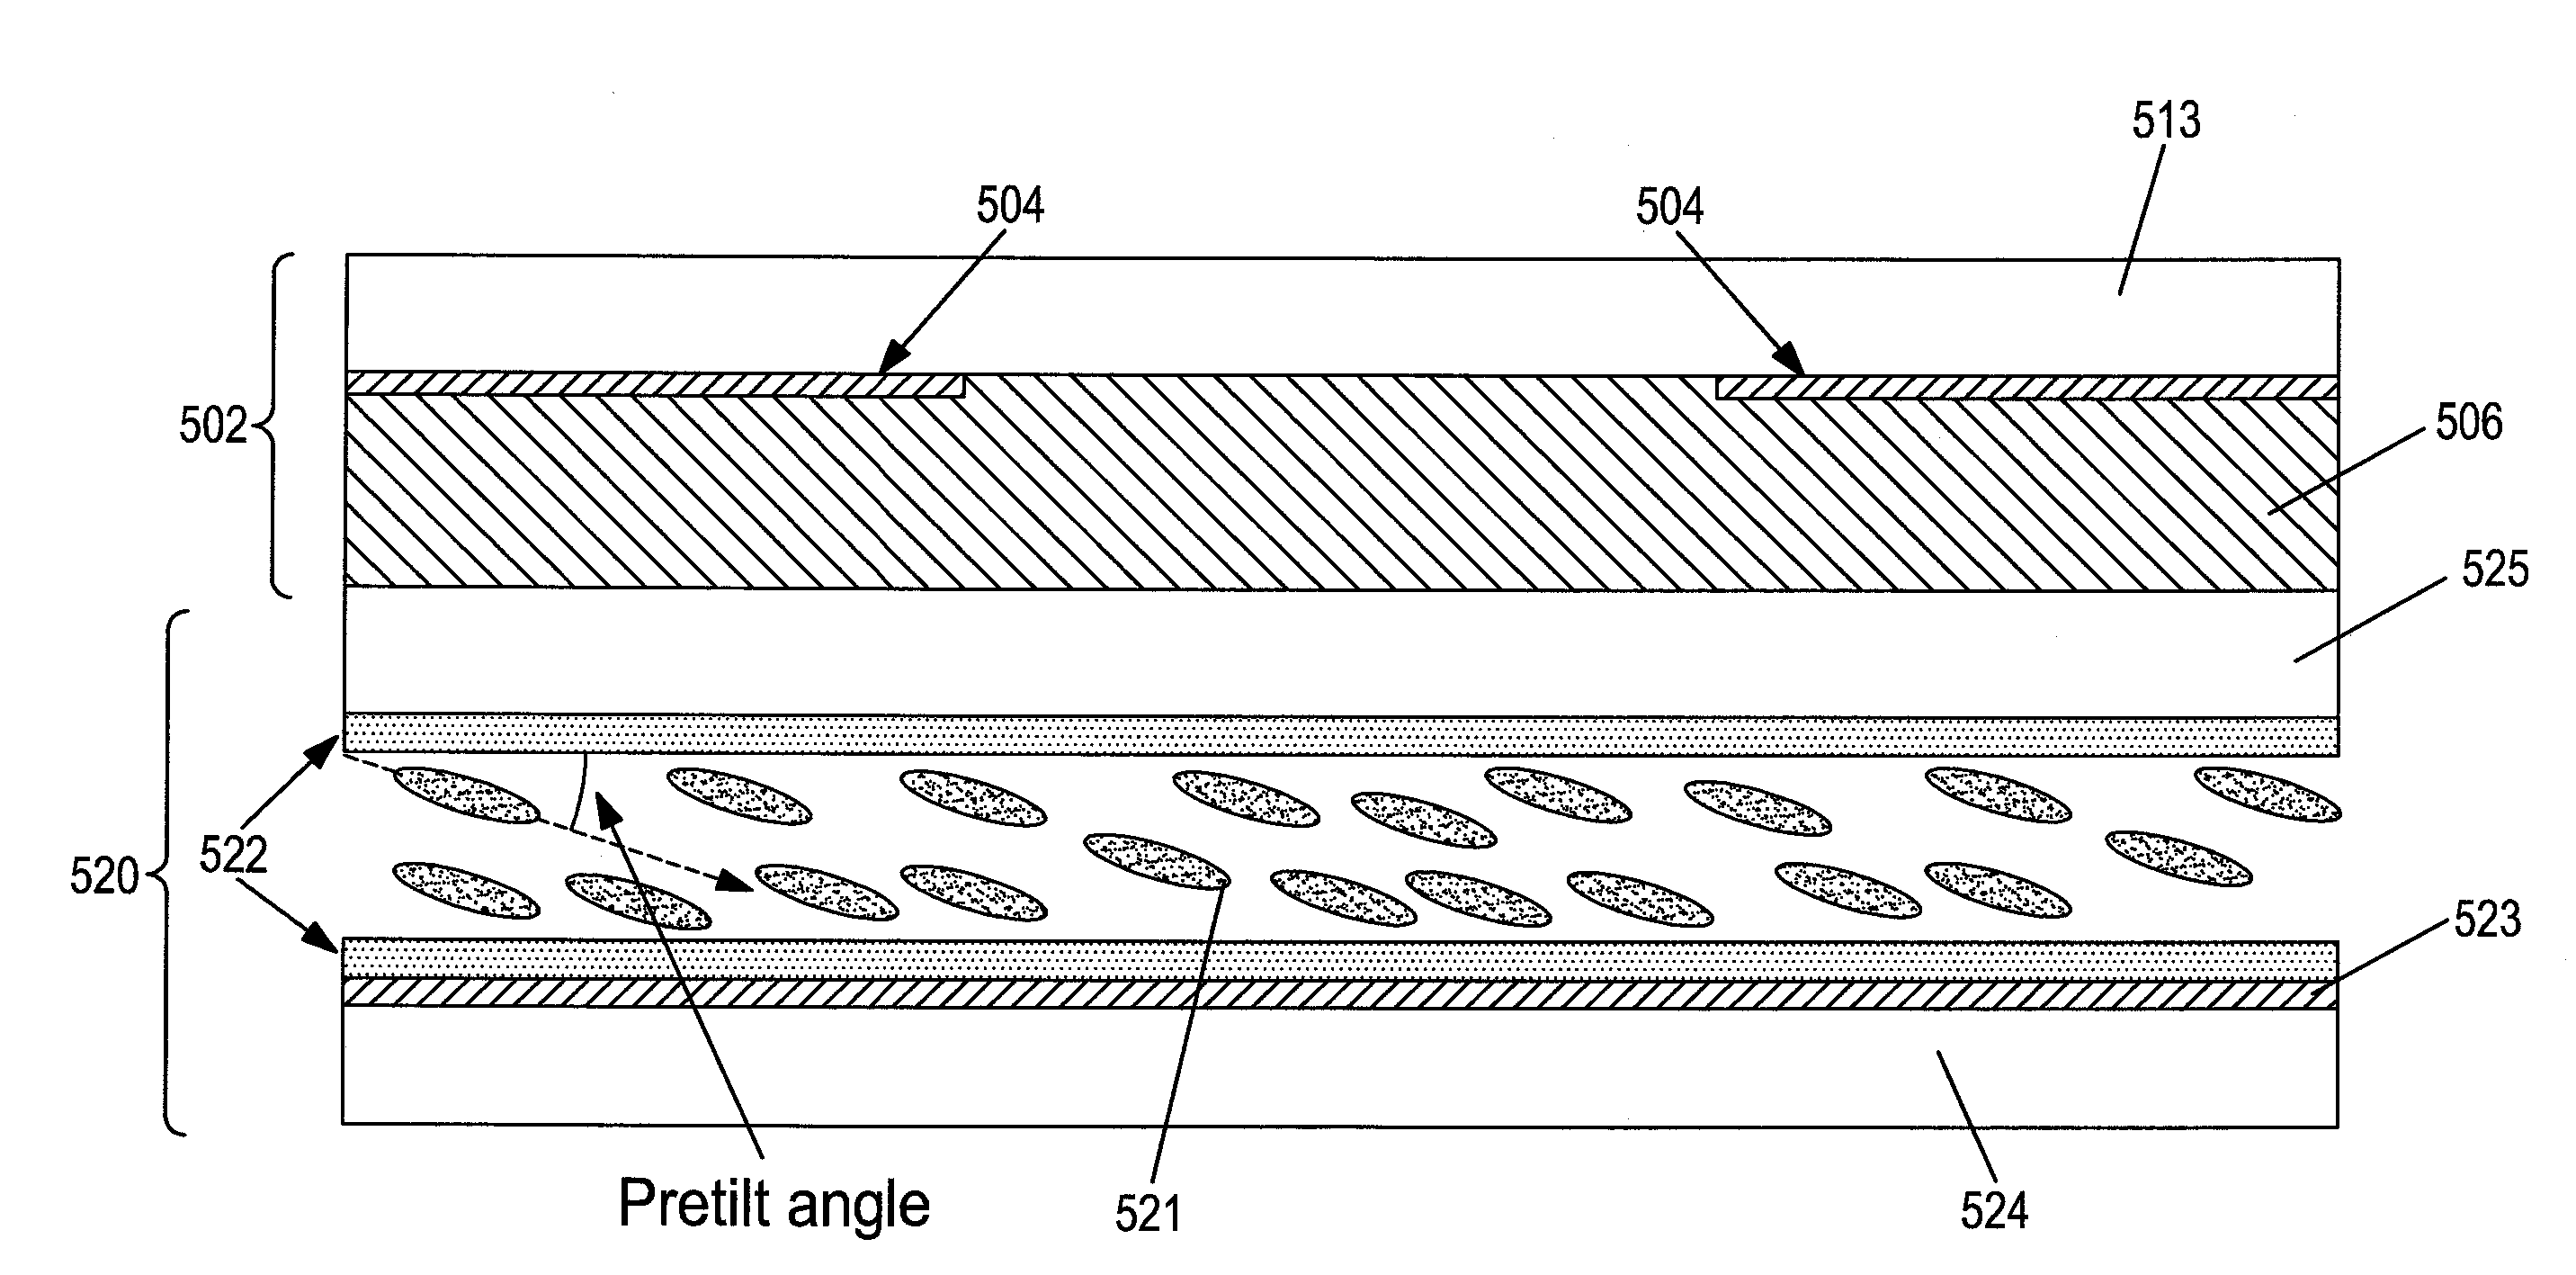 Image stabilization and shifting in a liquid crystal lens